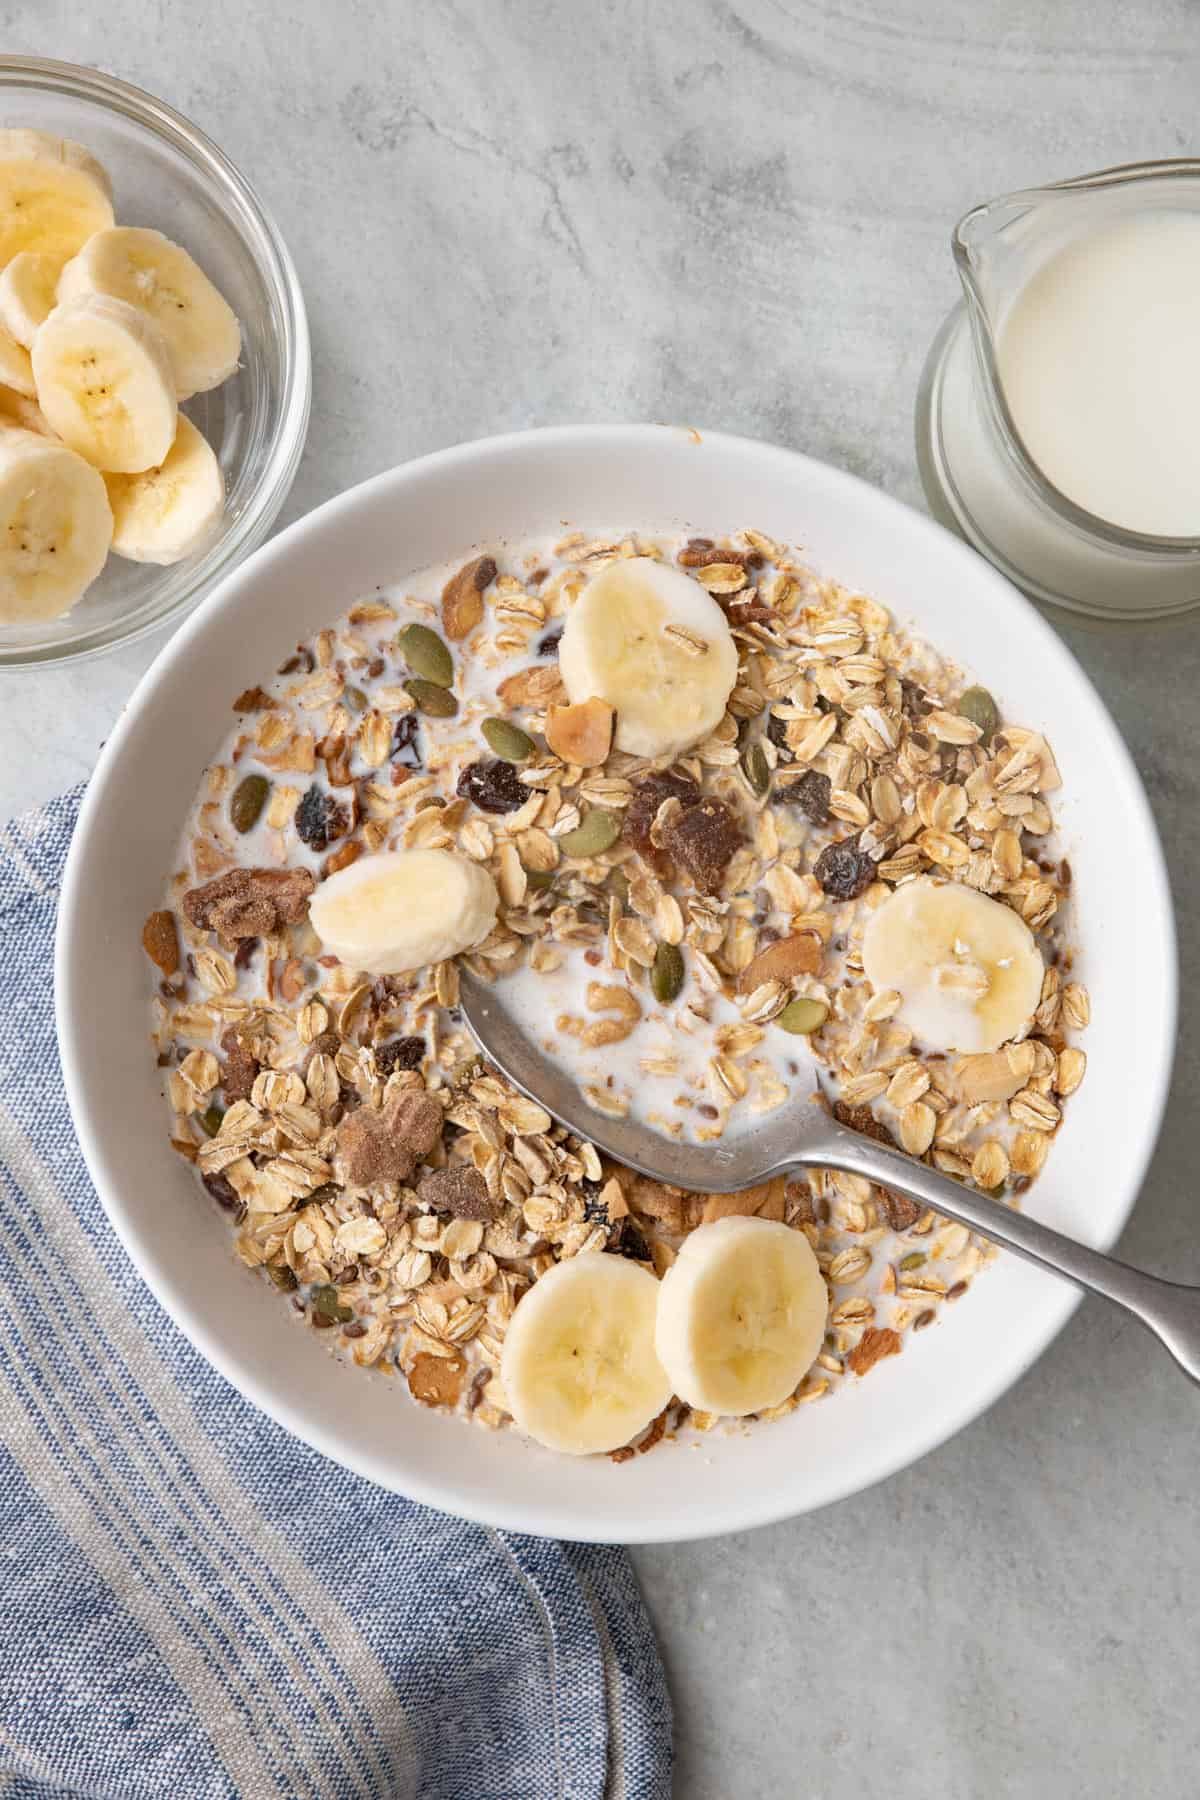 A bowl of muesli served cold with milk and bananas.